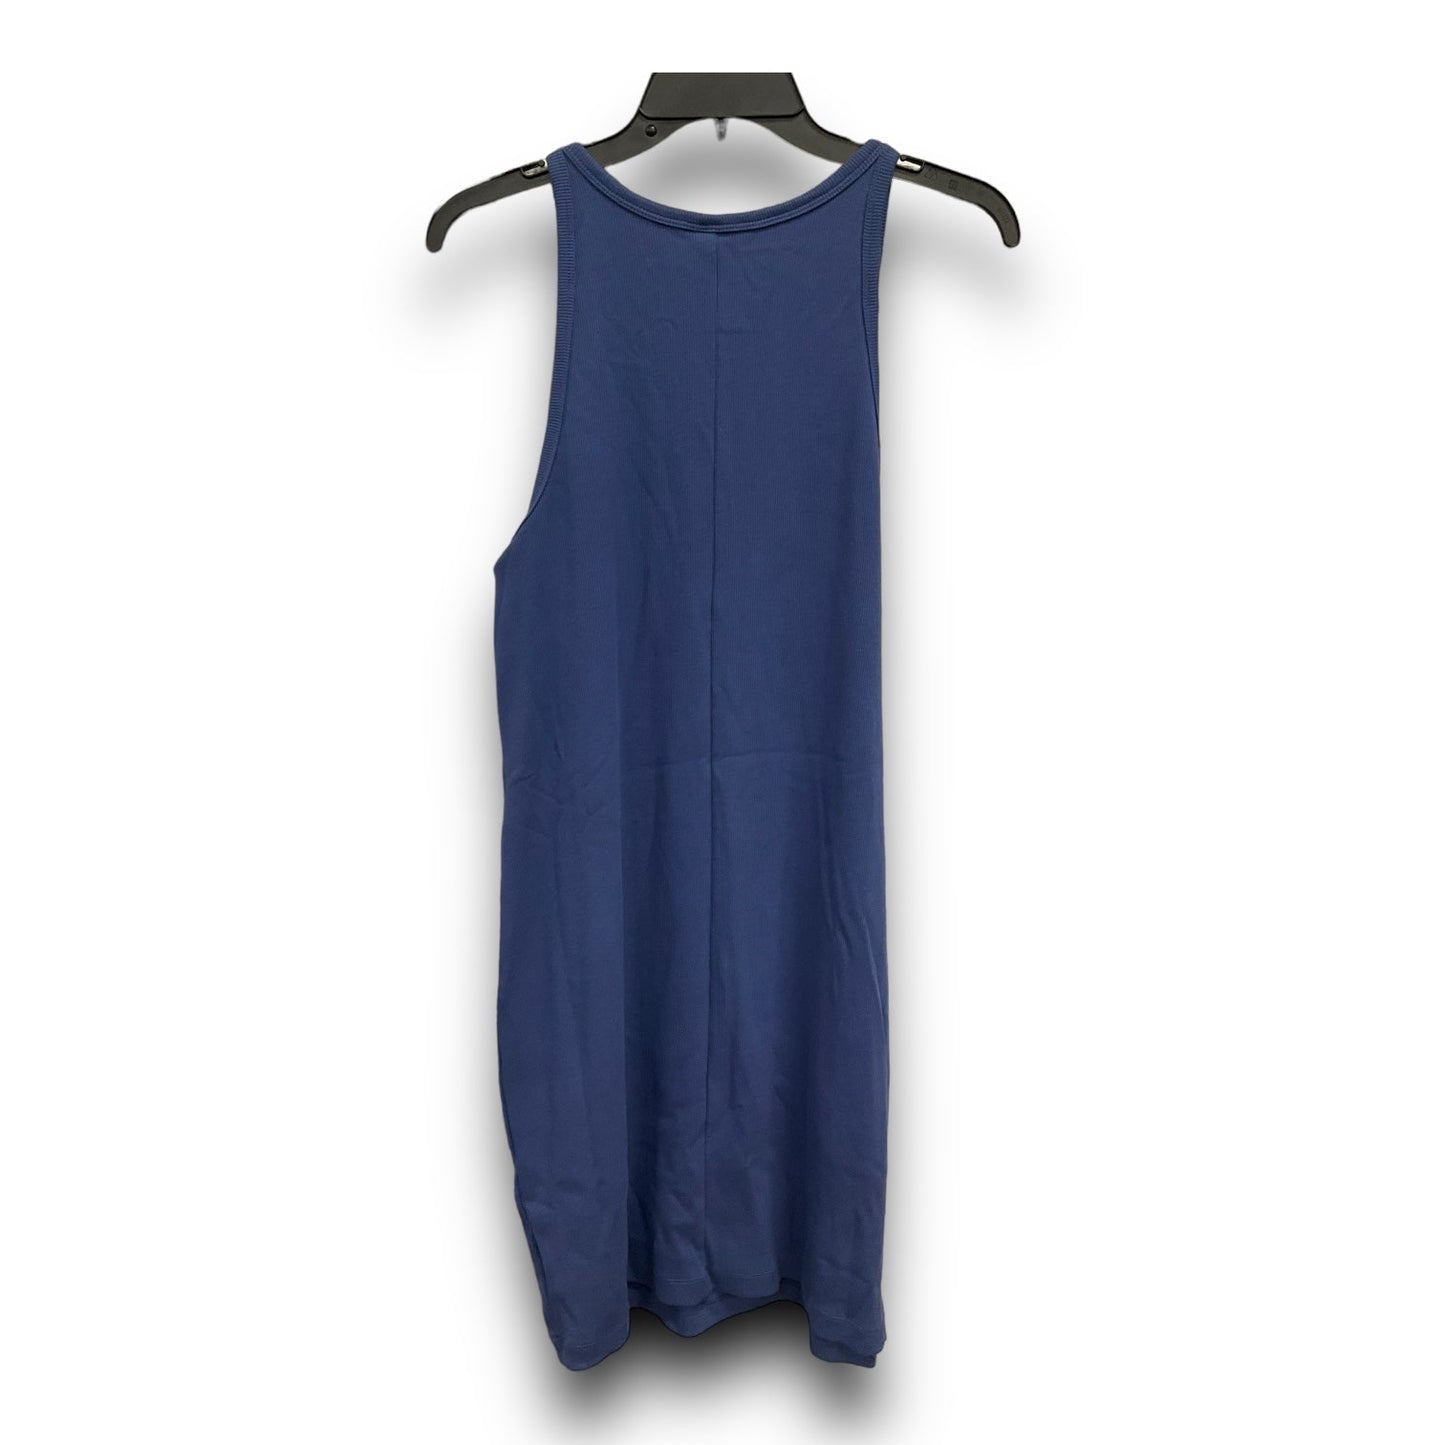 Blue Dress Casual Maxi Old Navy, Size 2x